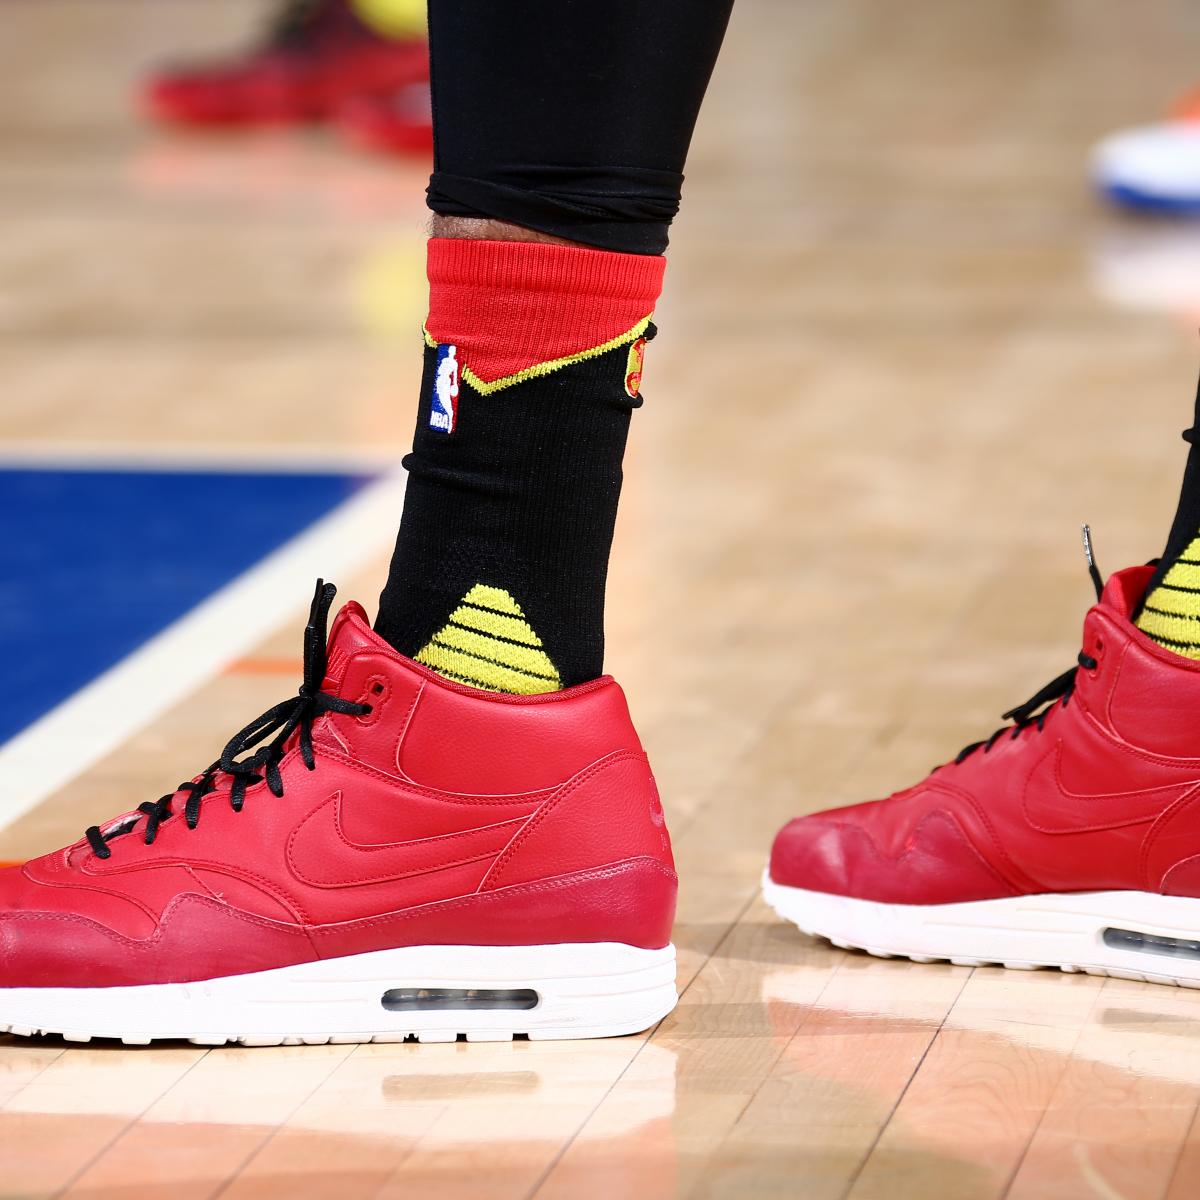 The Most Popular Shoes And Brands Worn By Players Around The NBA